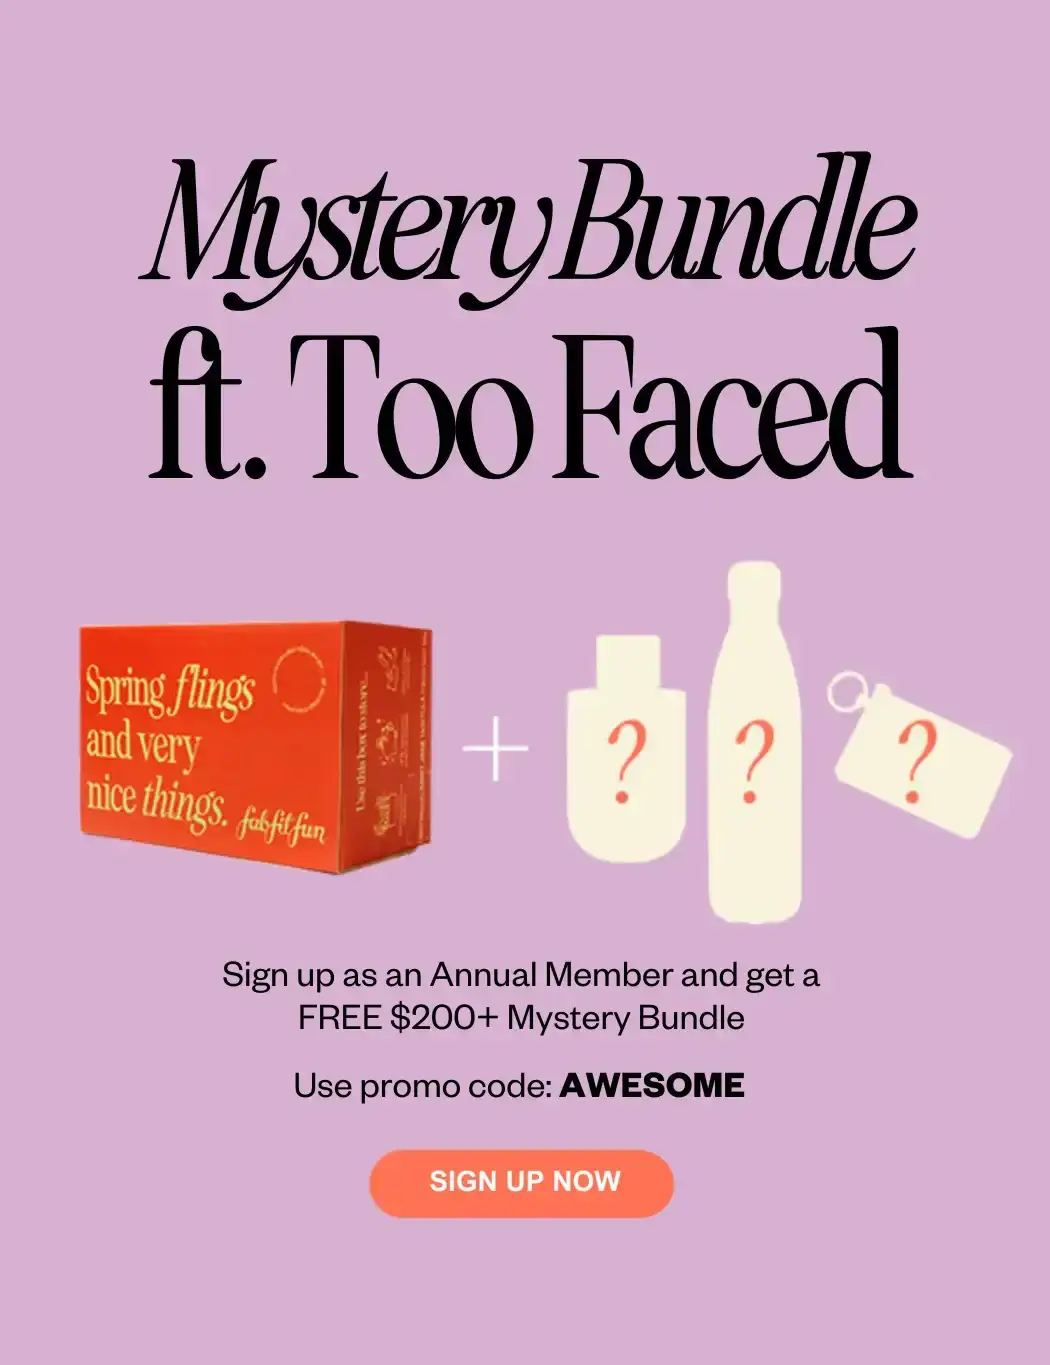 Sign Up as an Annual Member and get a FREE \\$200+ Mystery bundle